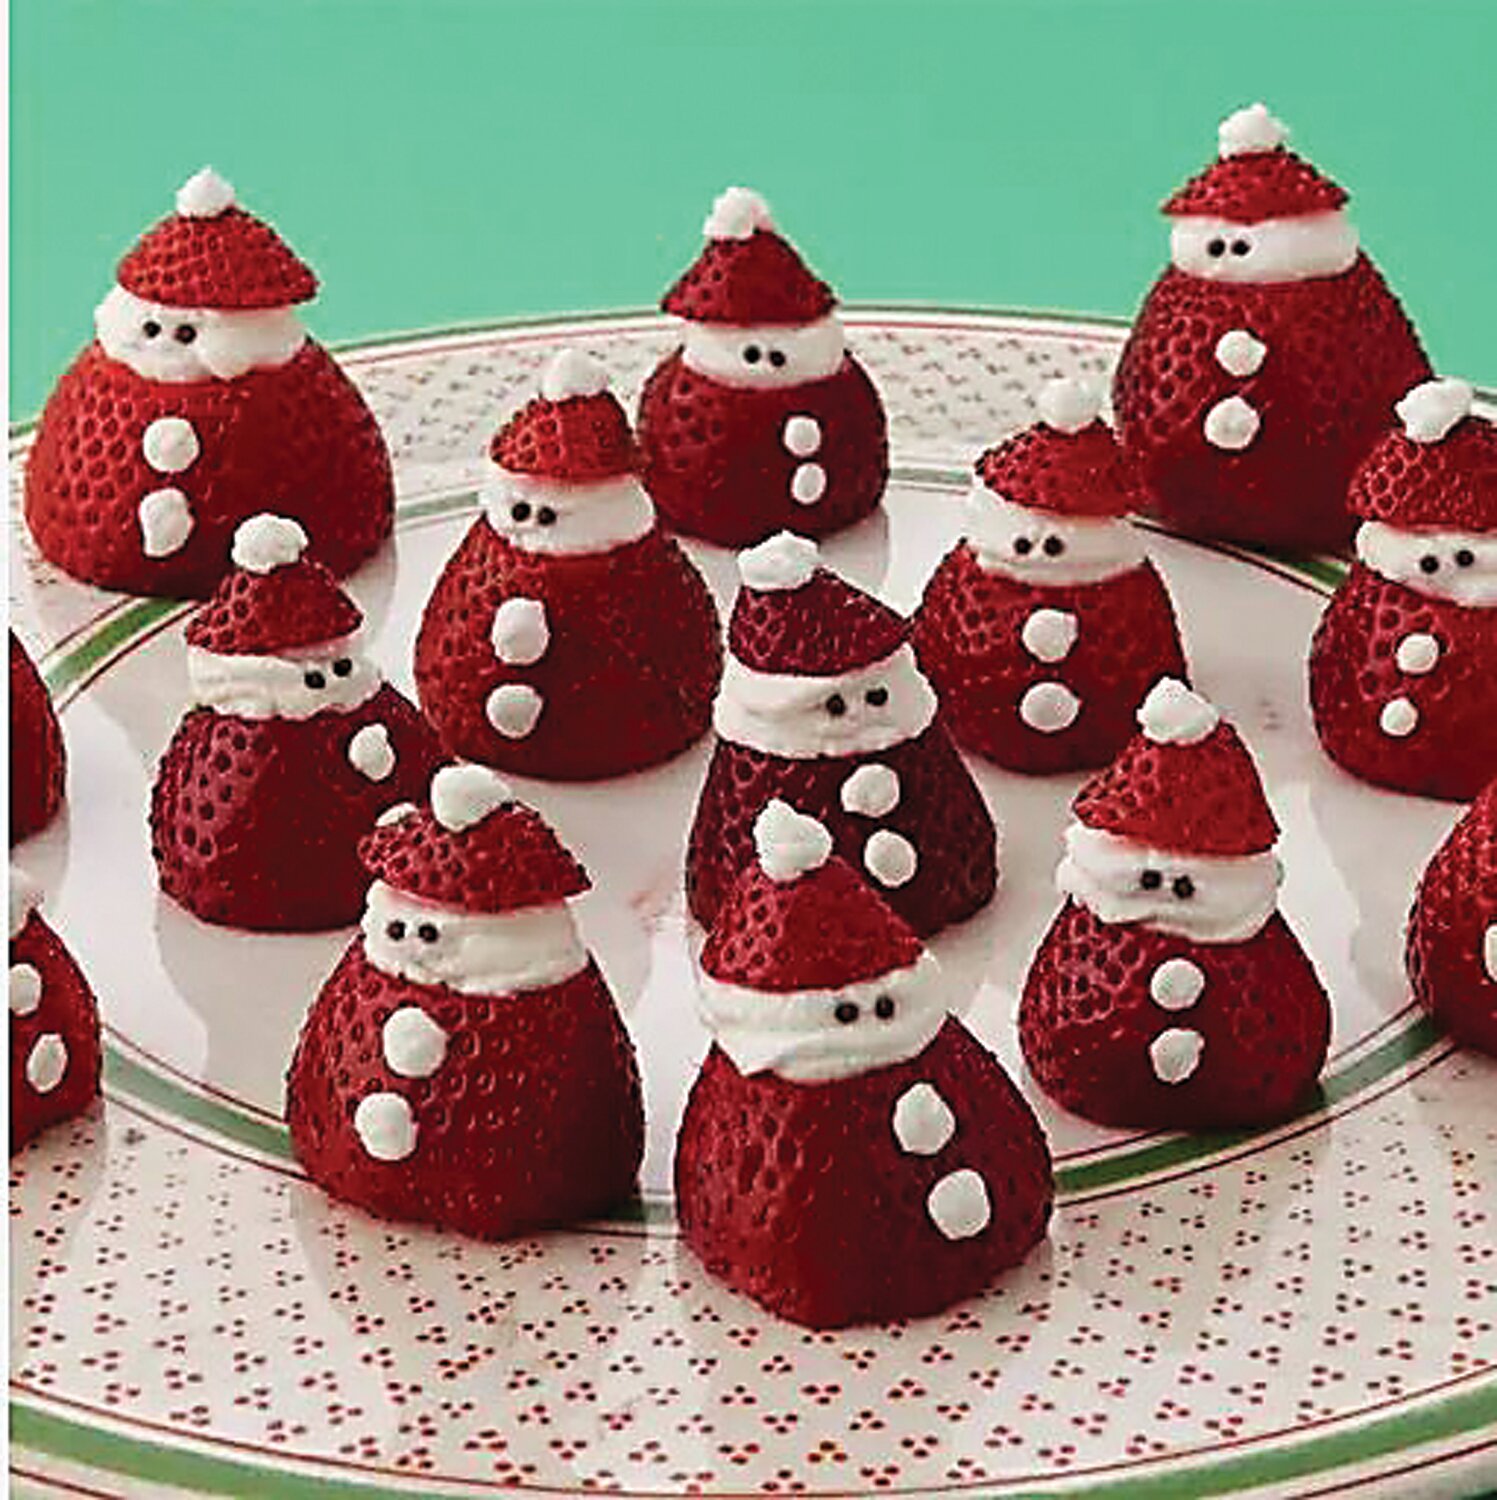 Strawberry Santas are quick and easy to make; even the kids can help.